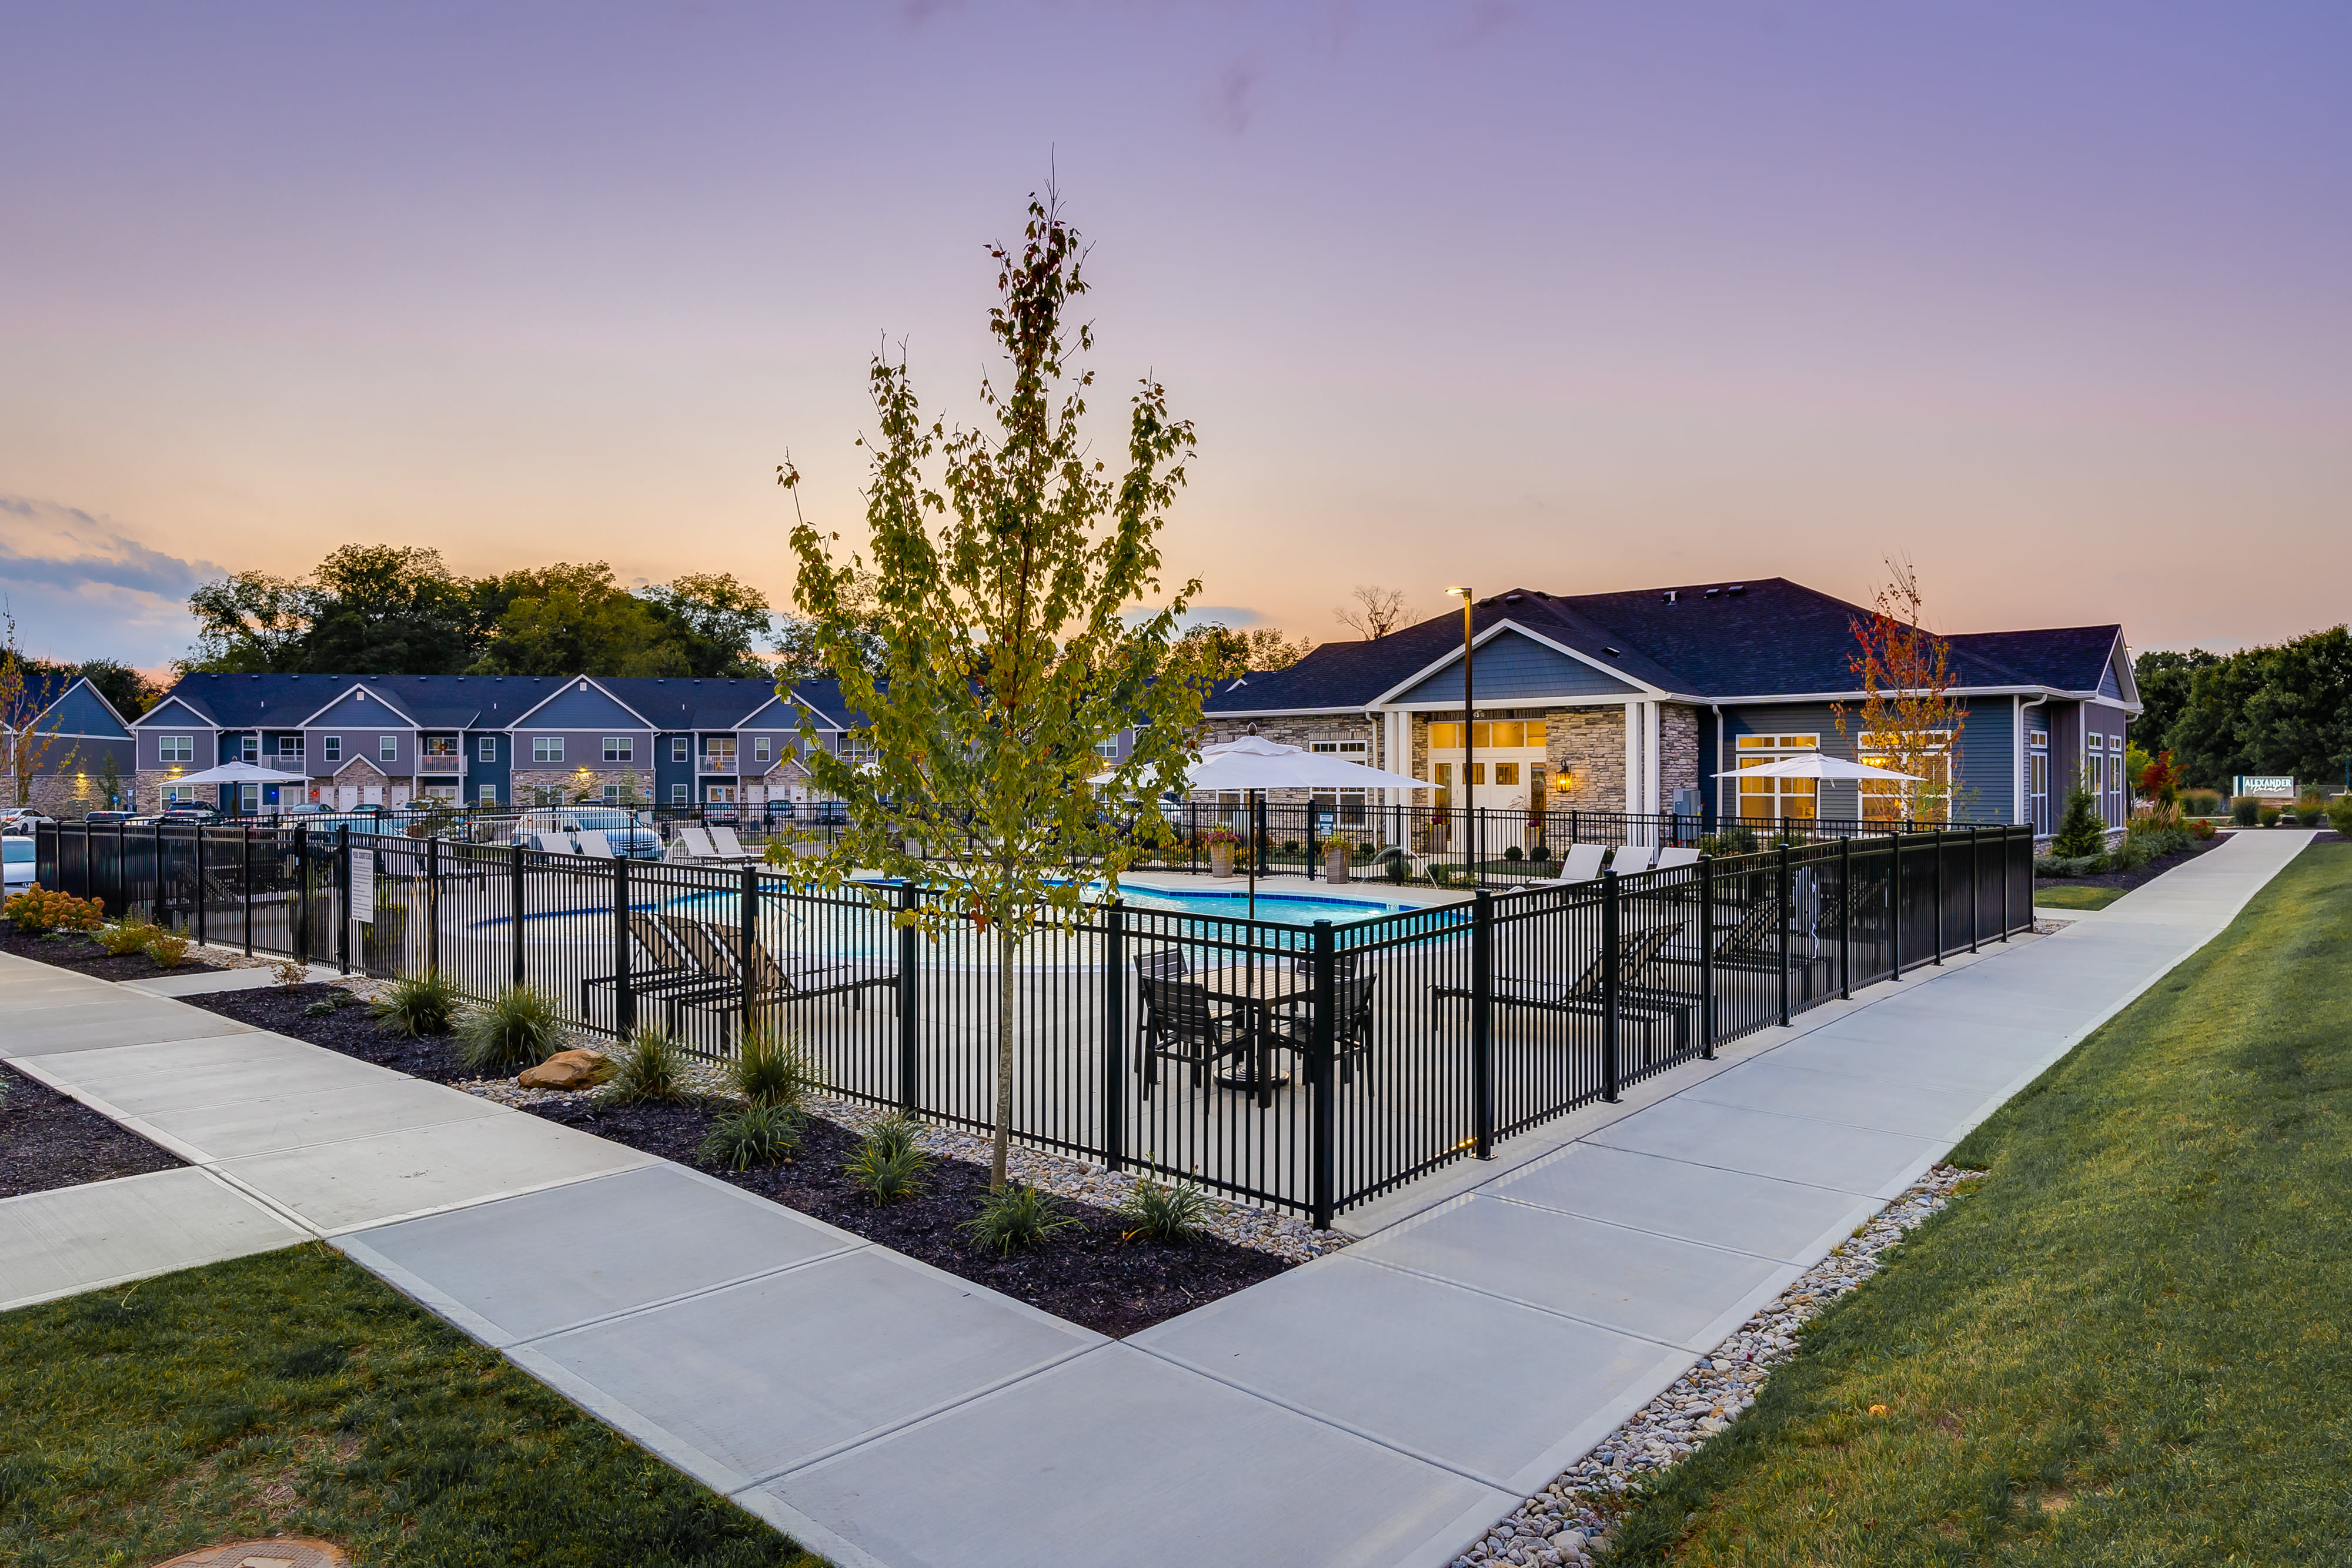 Swimming pool area at Alexander Pointe Apartments in Maineville, Ohio